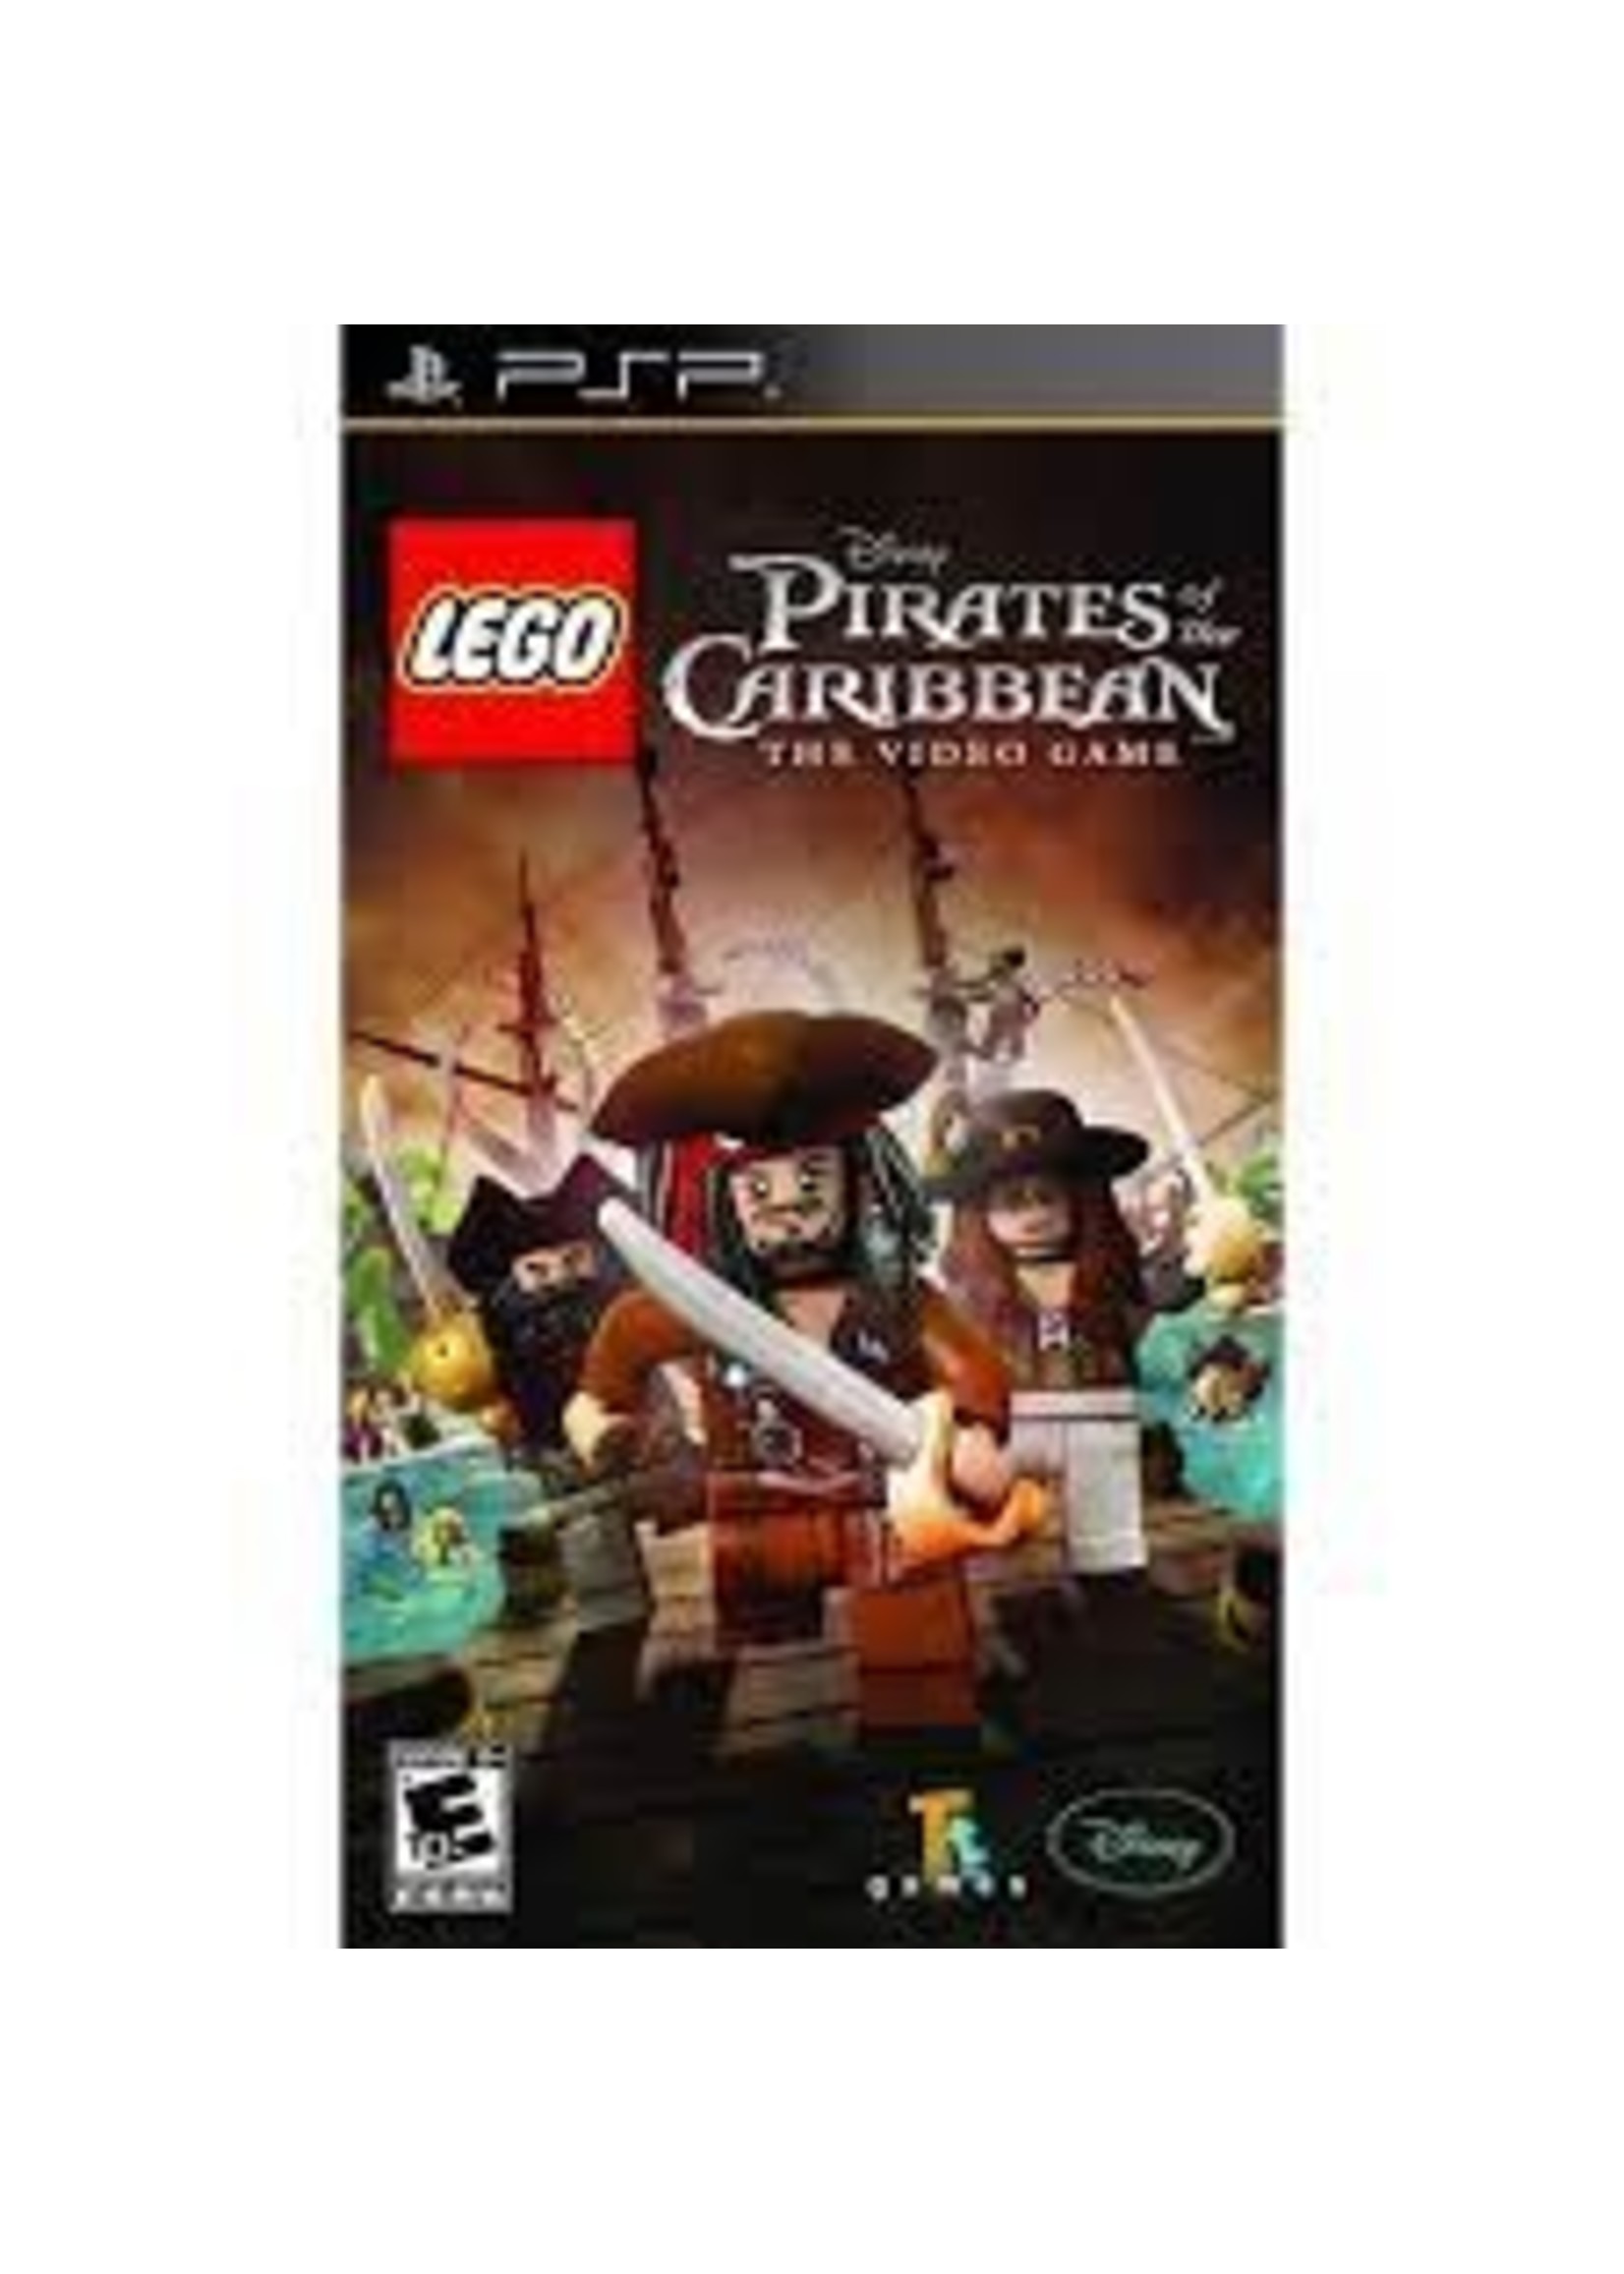 Sony Playstation Portable (PSP) LEGO Pirates of the Caribbean: The Video Game